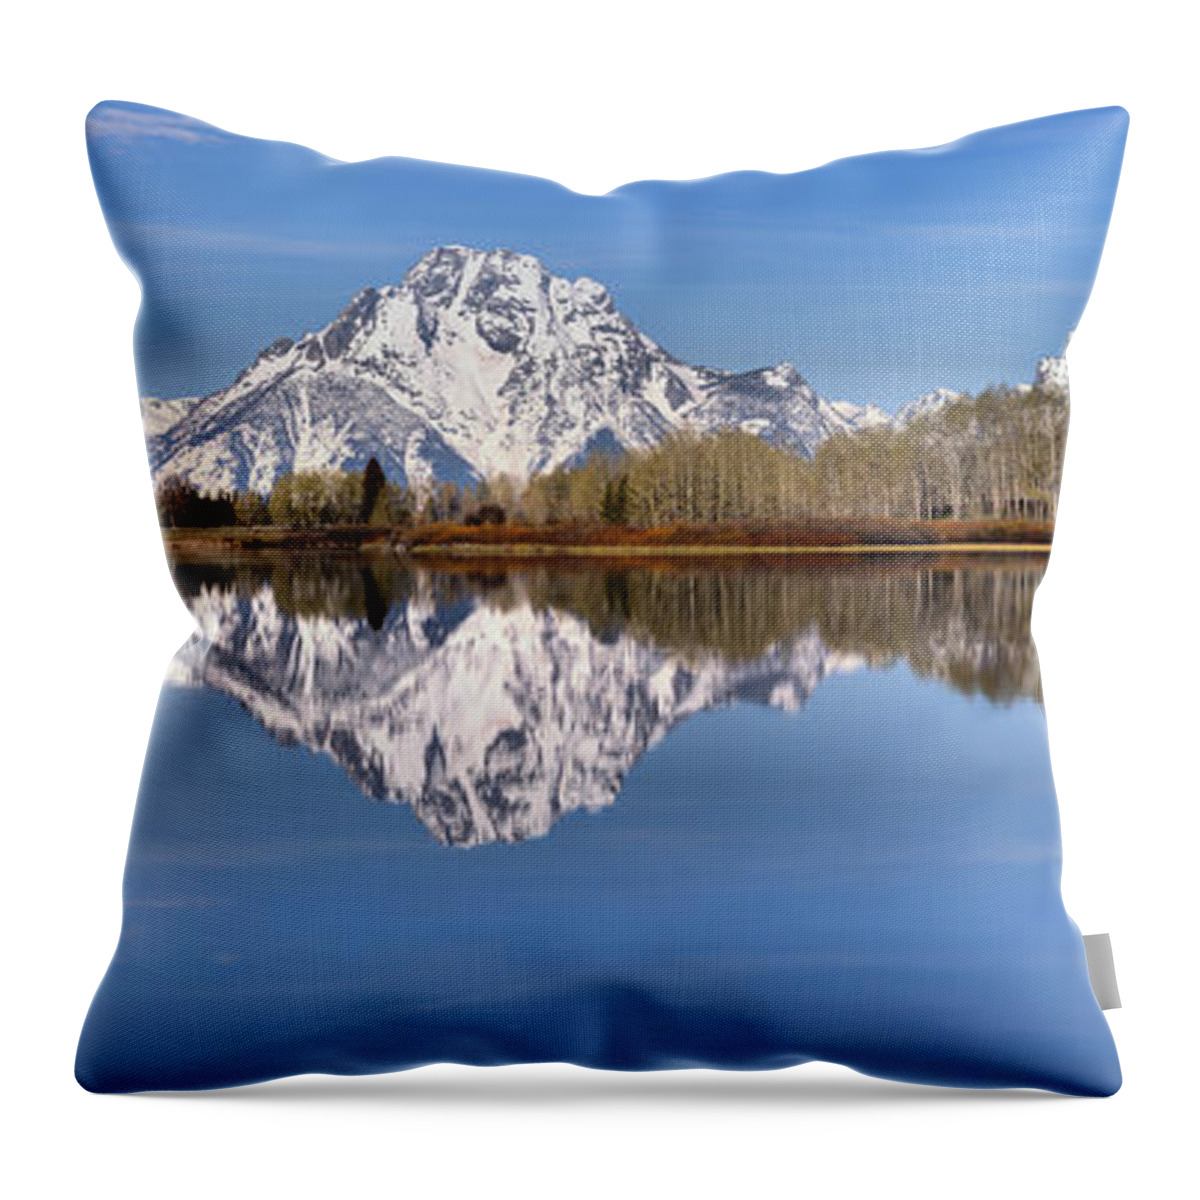 Oxbow Bend Throw Pillow featuring the photograph Blue Morning At Oxbow Bend by Adam Jewell